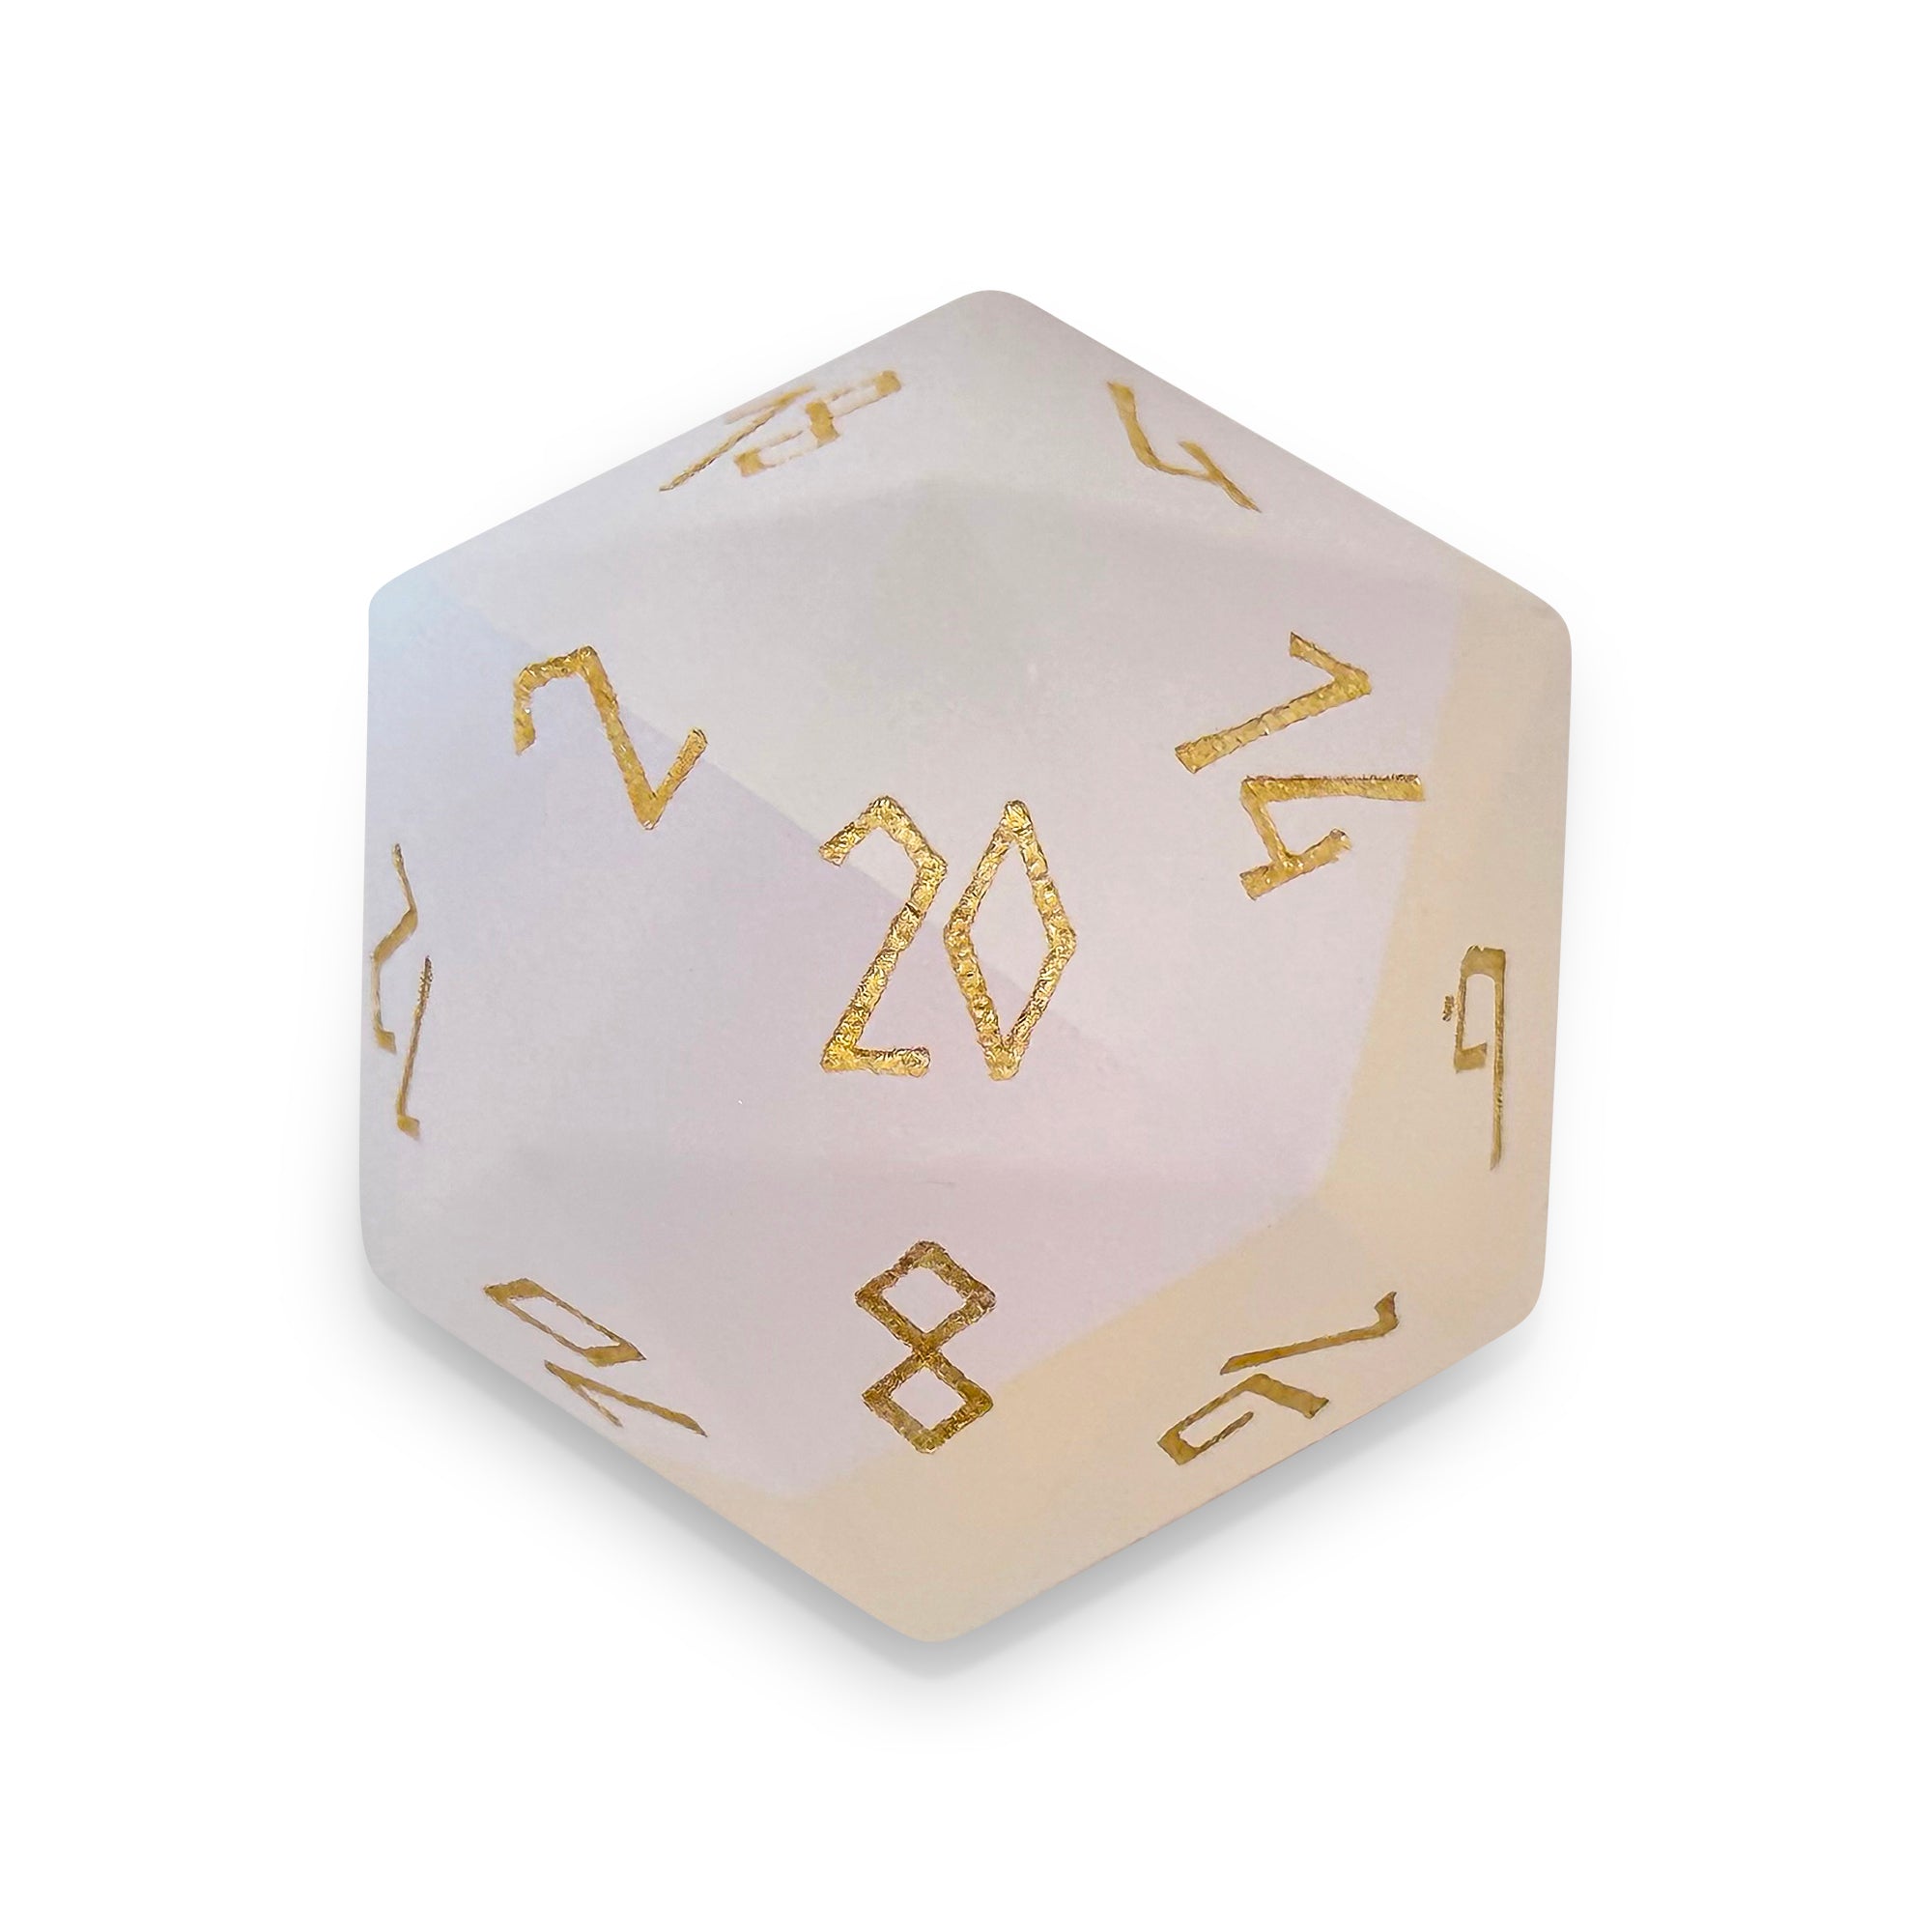 Frosted K9 Rainbow Glass - Gold Font Boulder 30mm Glass Dice